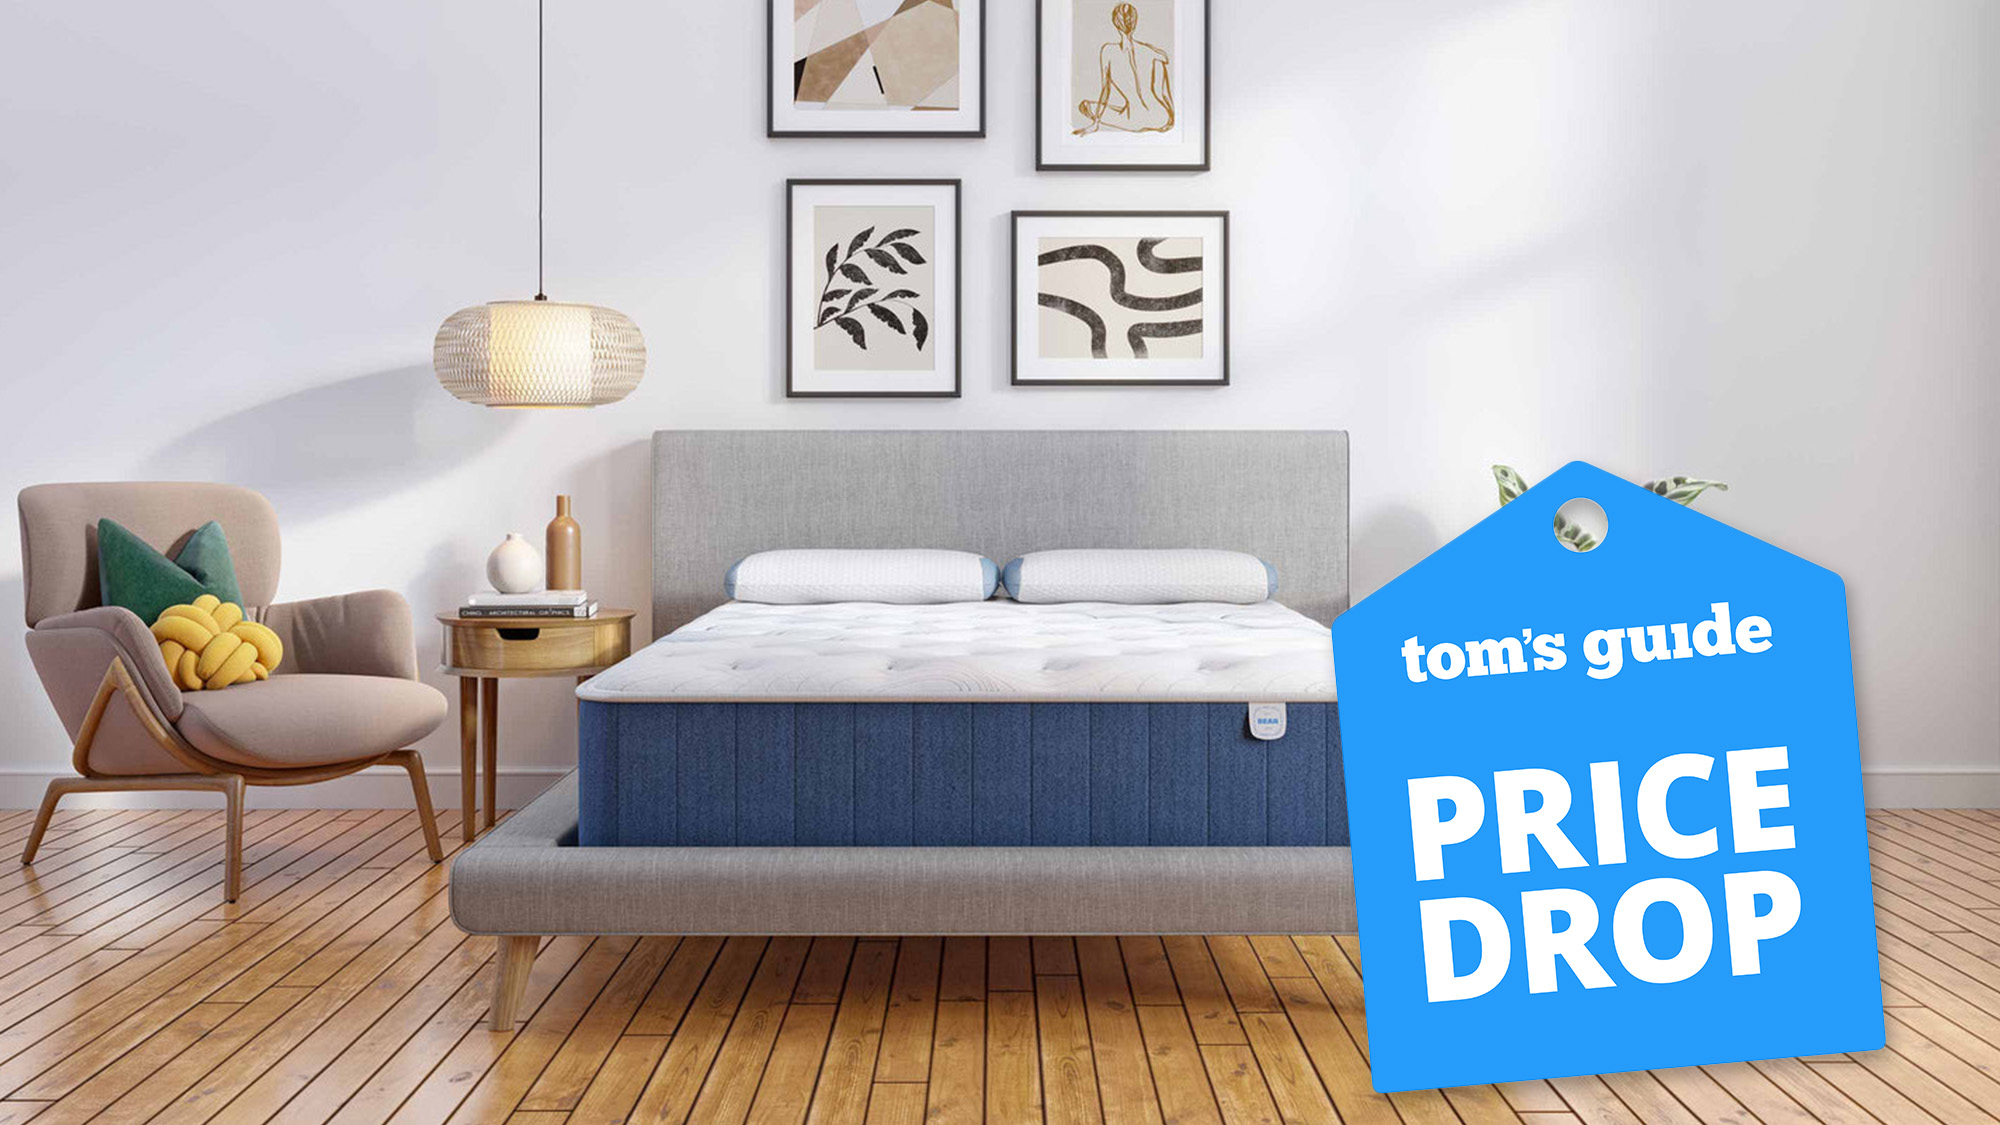 Hot sleepers, Bear’s new cooling mattress is now up to $999 off | Tom's ...